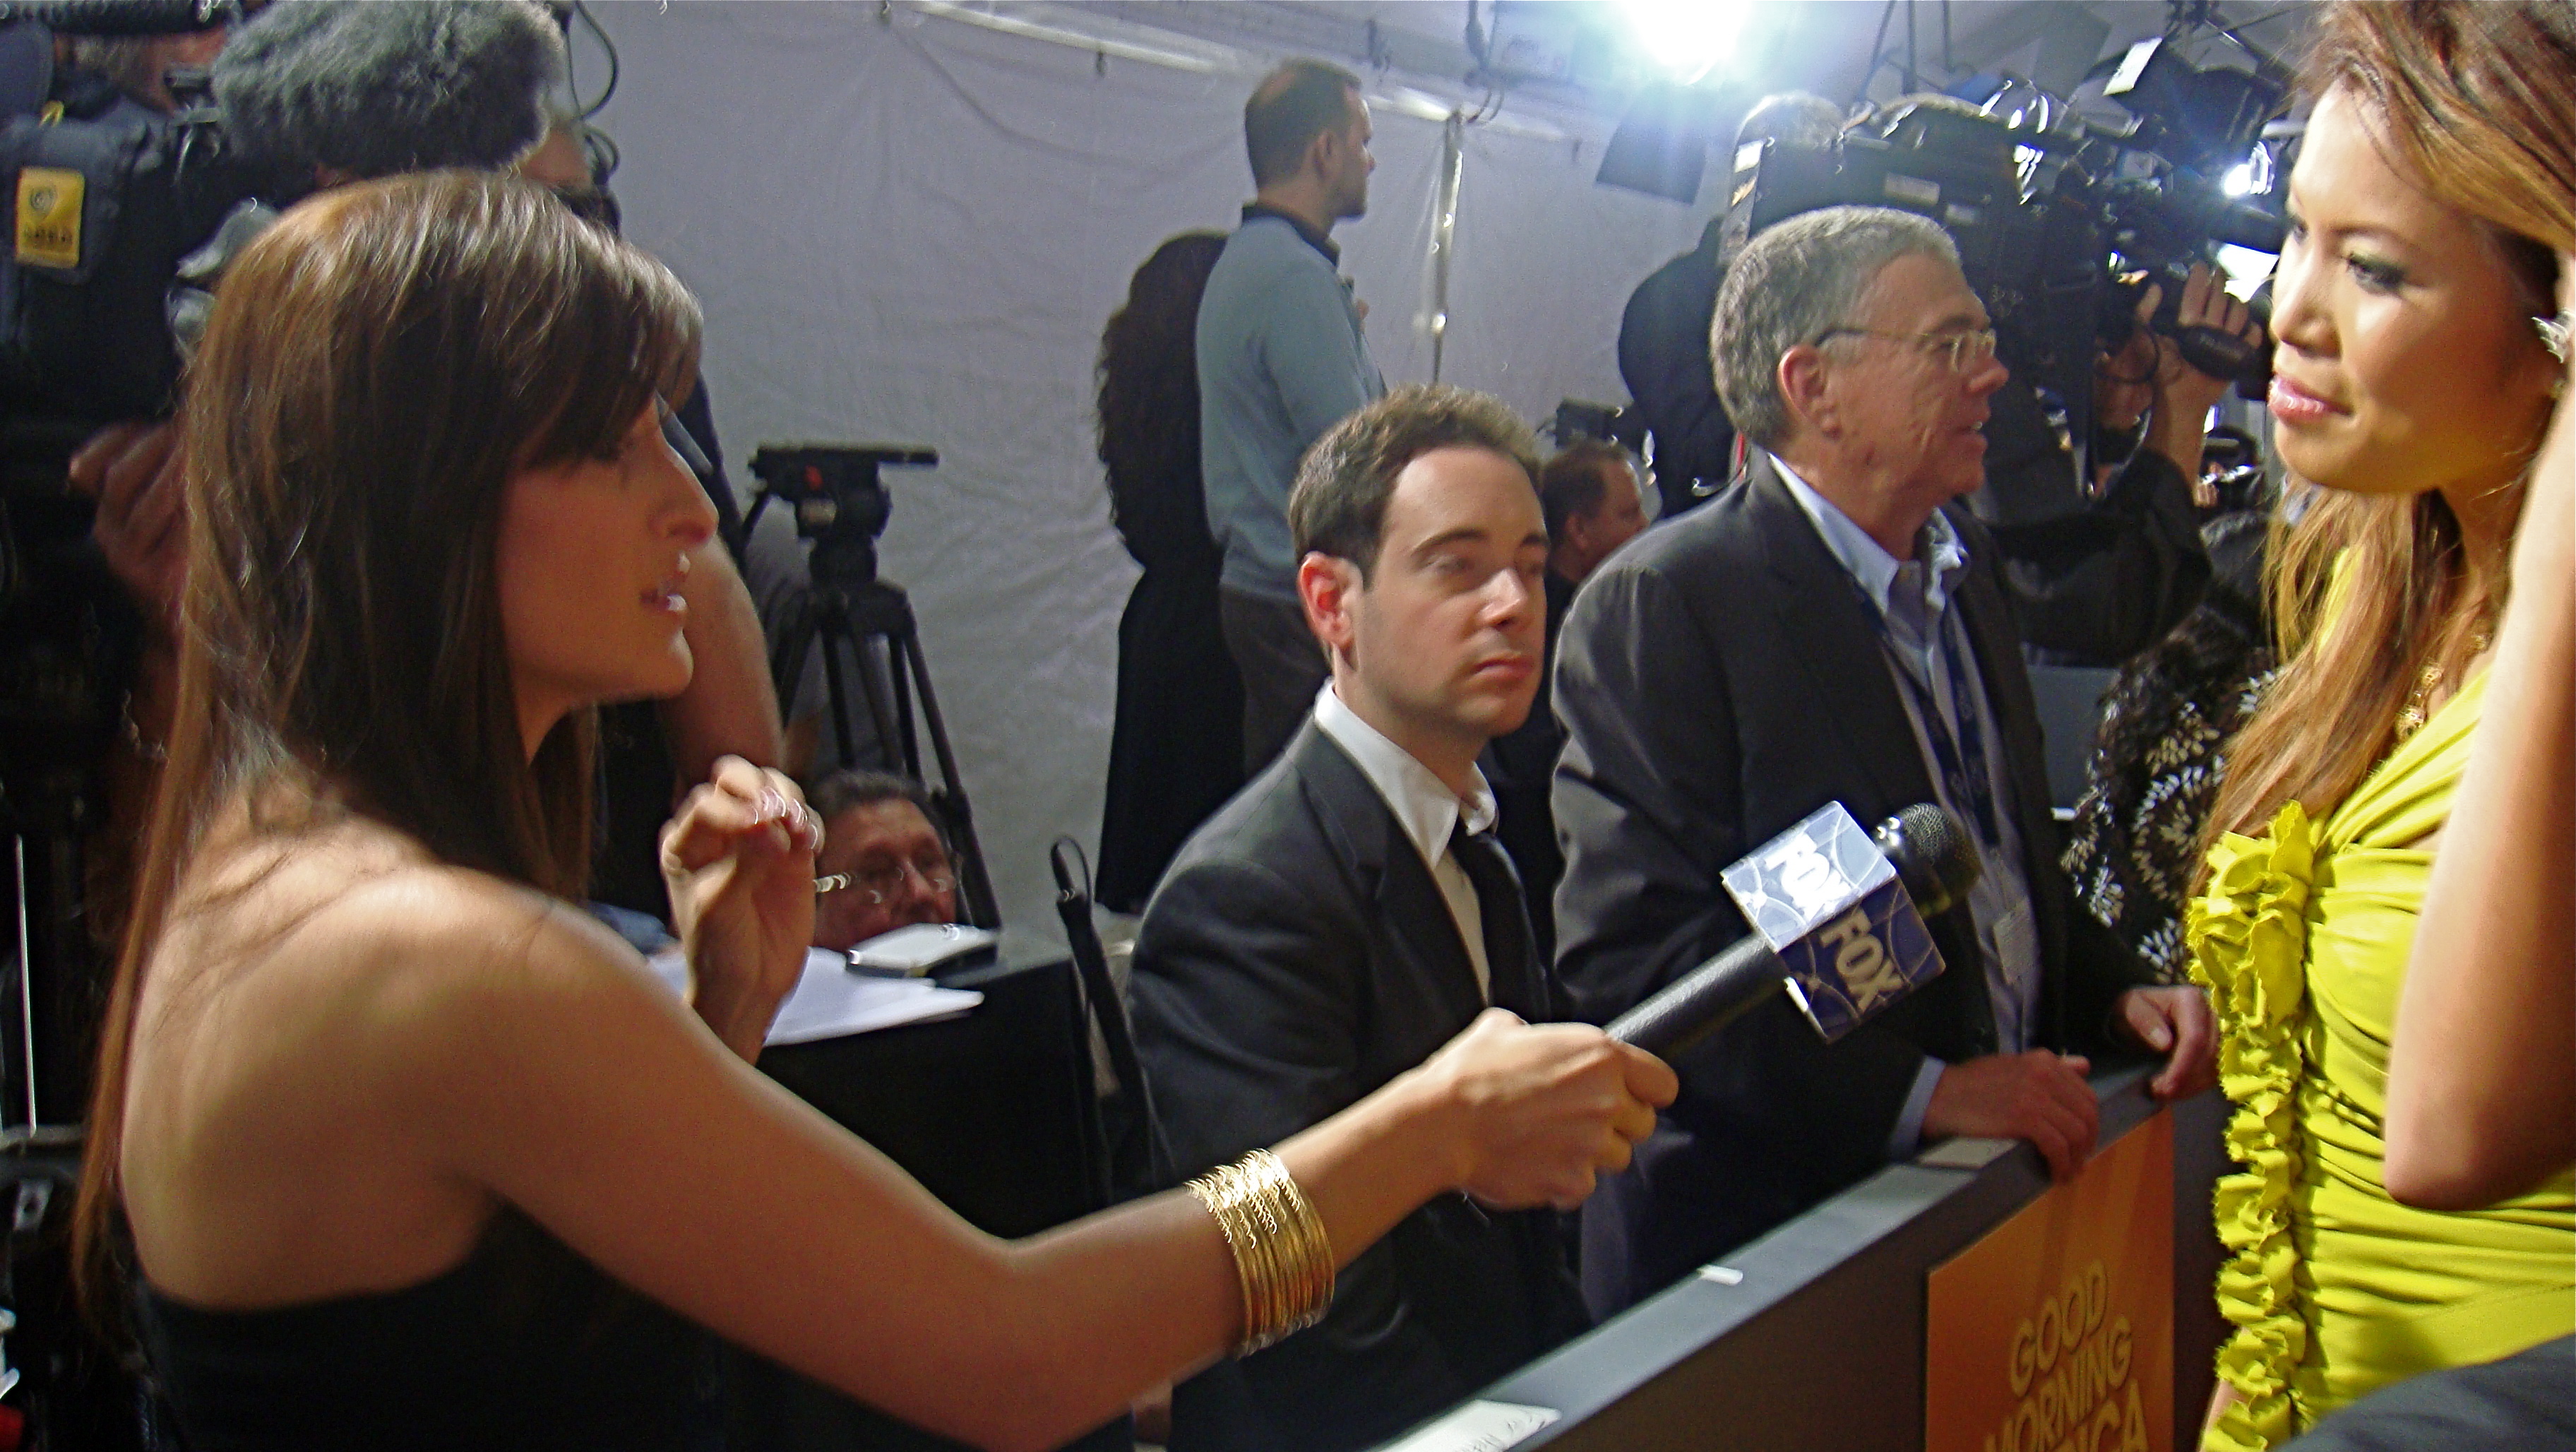 TV personality Zarah doing a series of interview at the GRAMMY Awards Red Carpet in Los Angeles, CA.